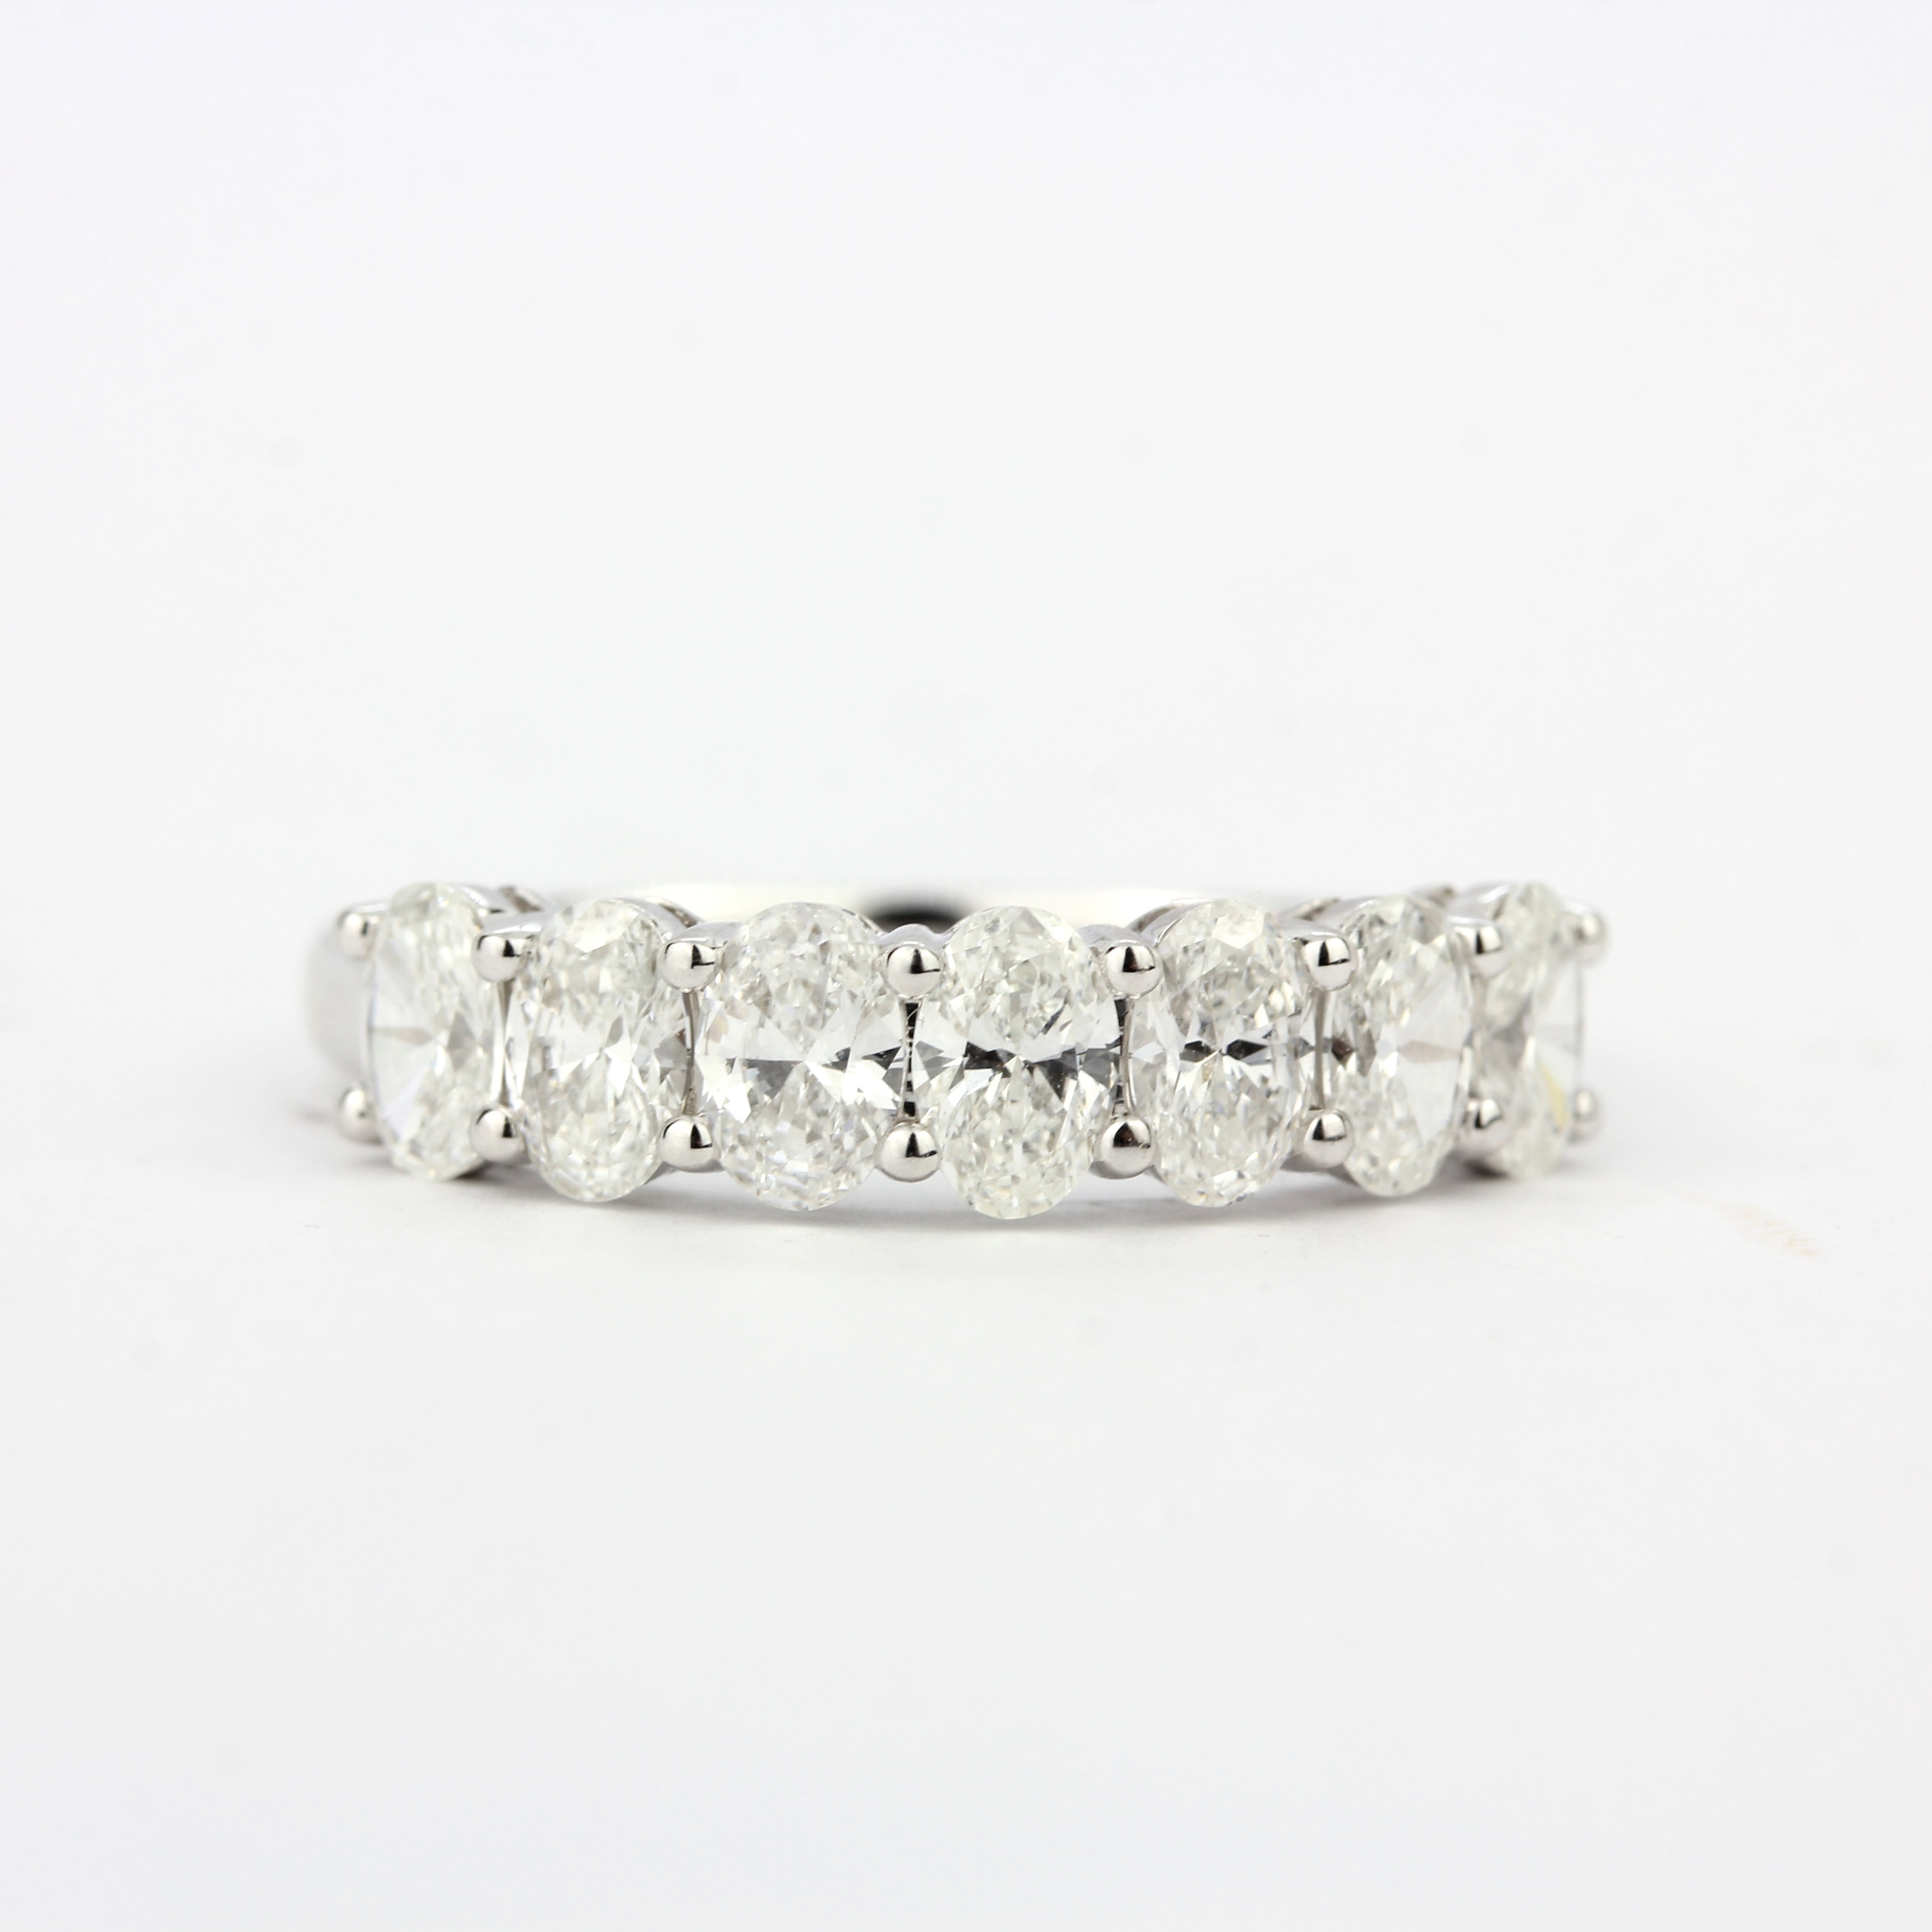 An 18ct white gold ring set with seven oval cut diamond, overall 1.37ct, ring size O.5